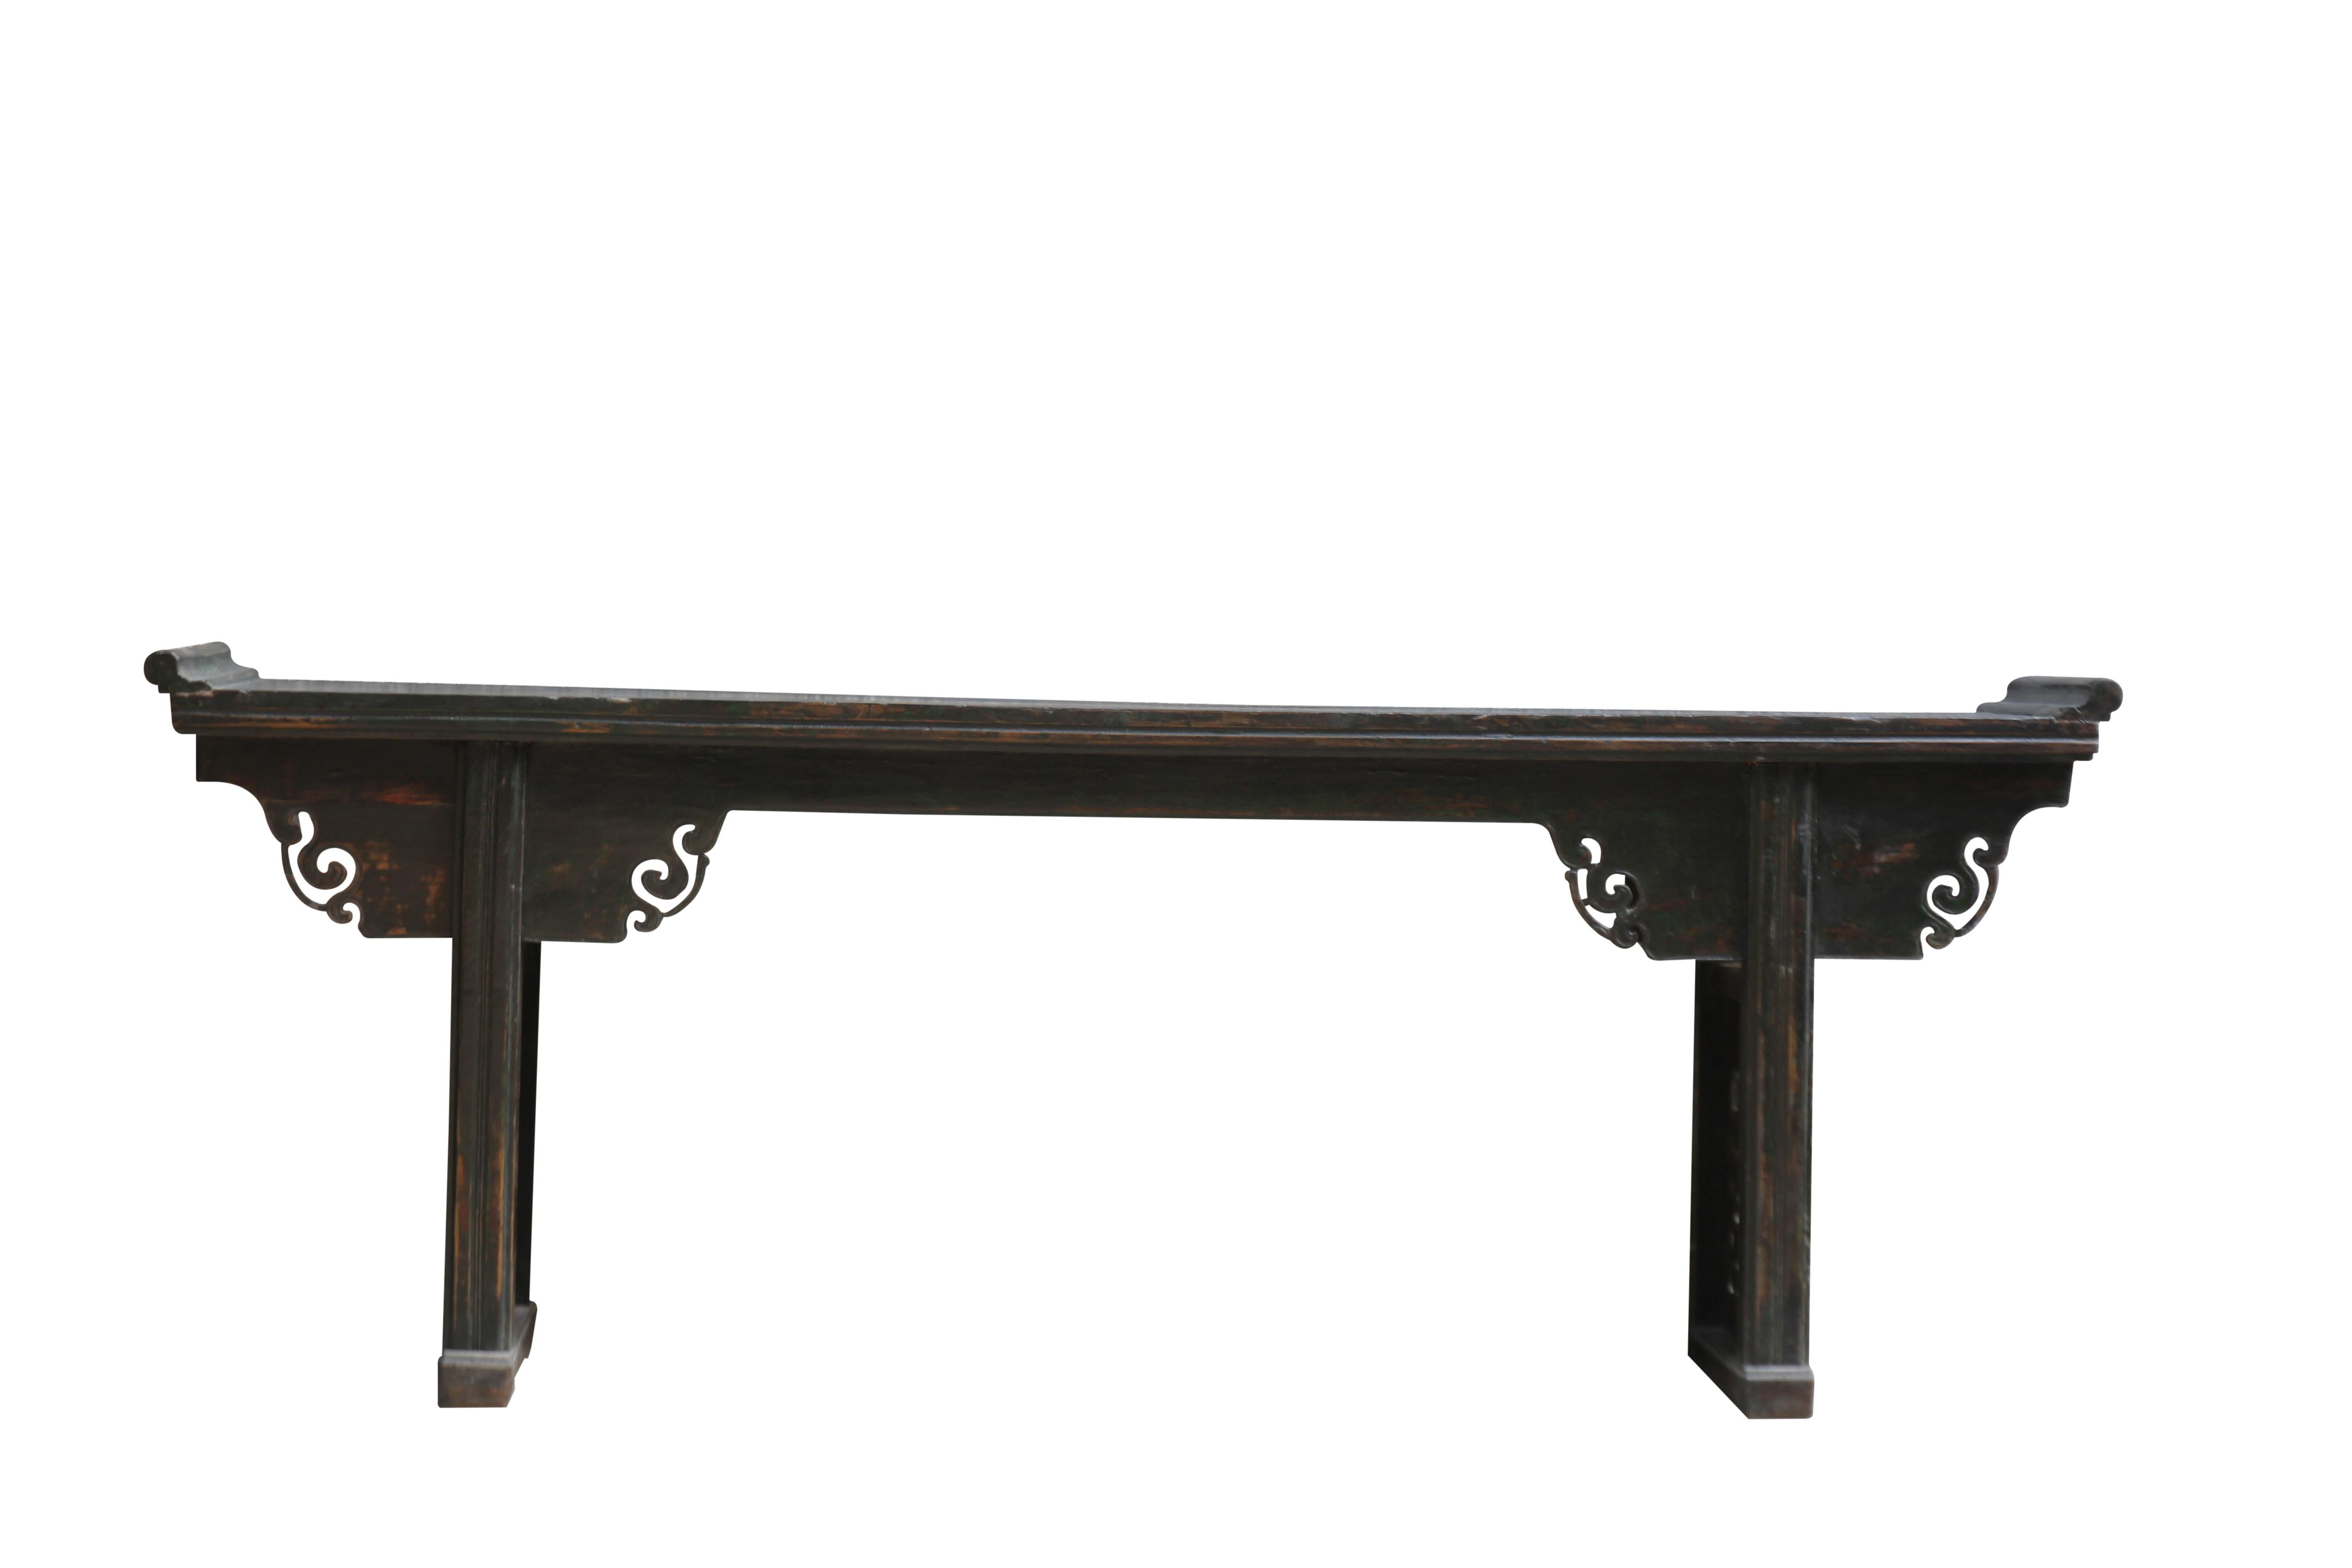 This large long antique altar table has a pair beautifully hand carved panel legs. The wide paneled spandrels decorated with a few carved curly tendrils under the top of the table add a balanced robust to this magnificent table. This 8 feet long